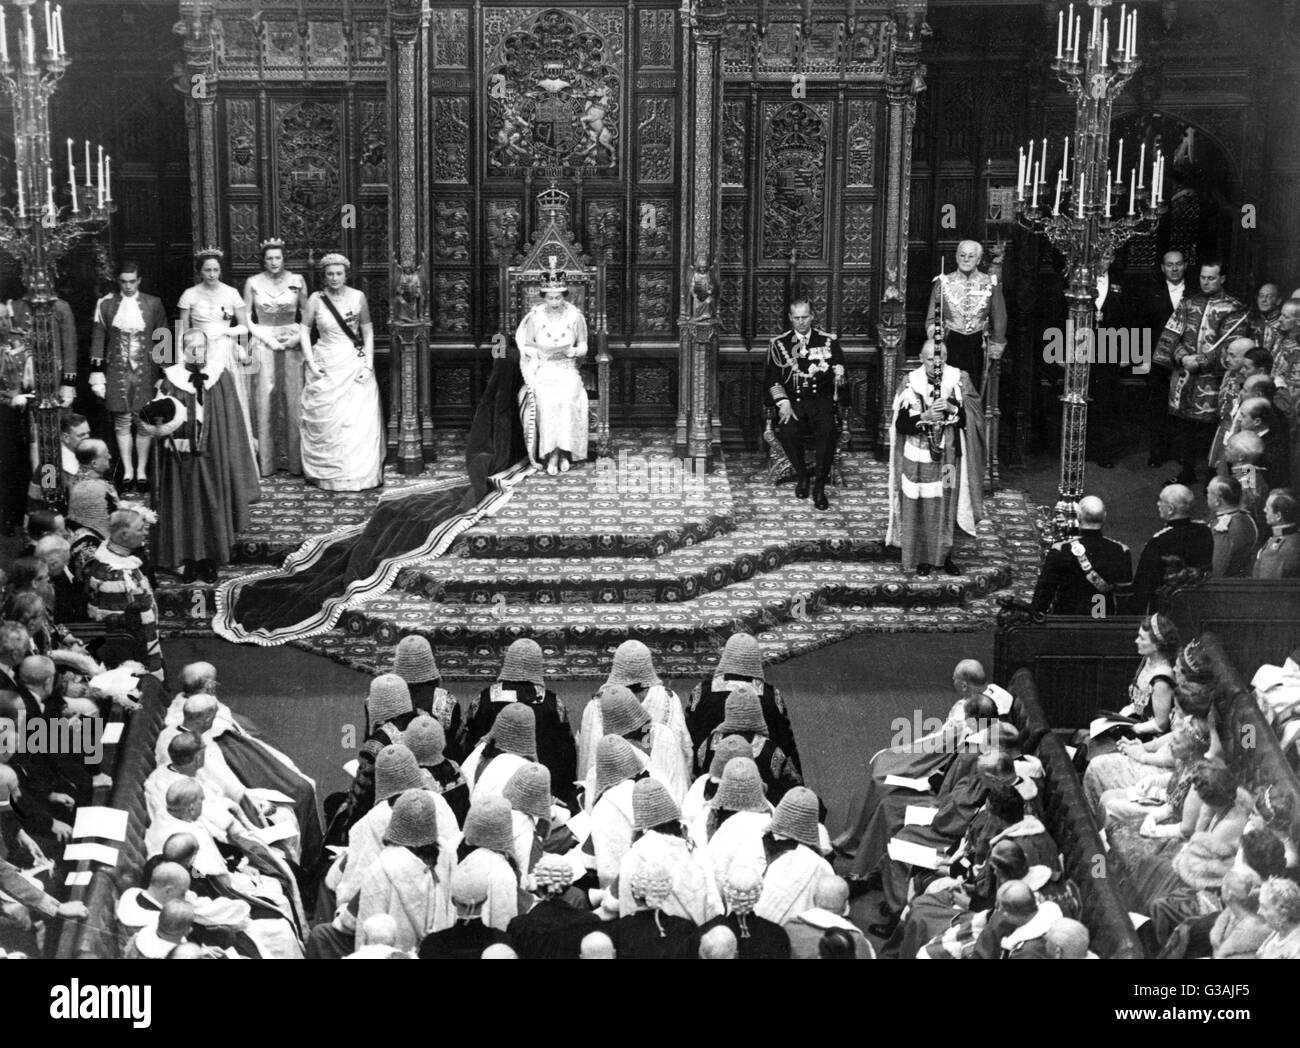 The State Opening of the Great British Parliament - House of Lords, Houses of Parliament, London, England     Date: circa 1959 Stock Photo